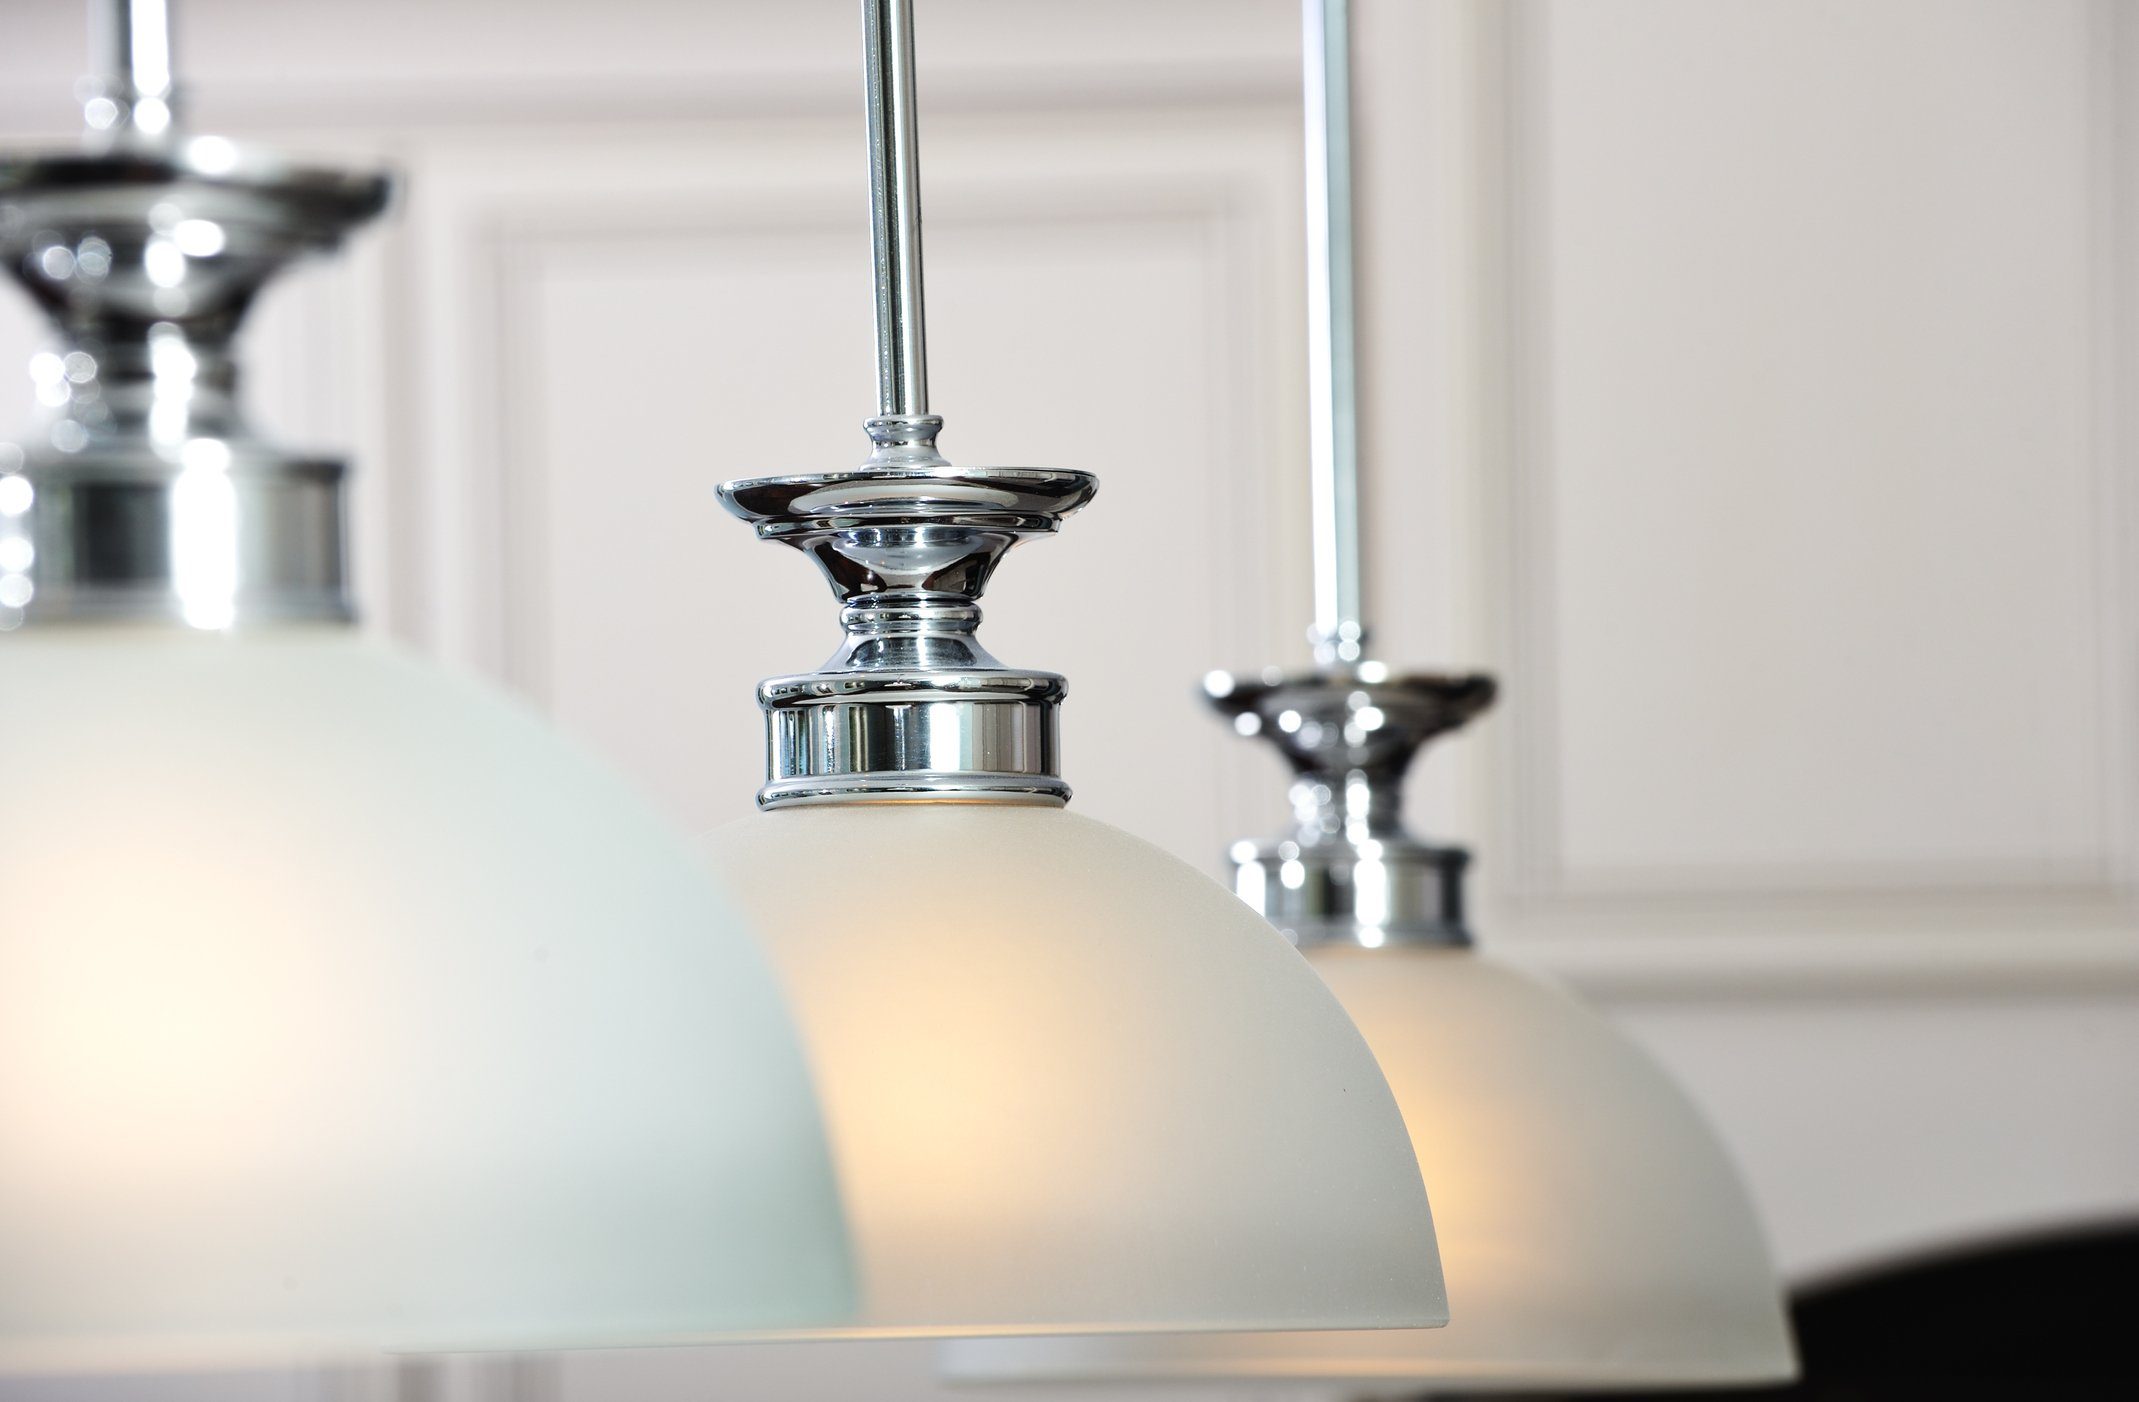 Interior ceiling lightings with white semi-spherical covers